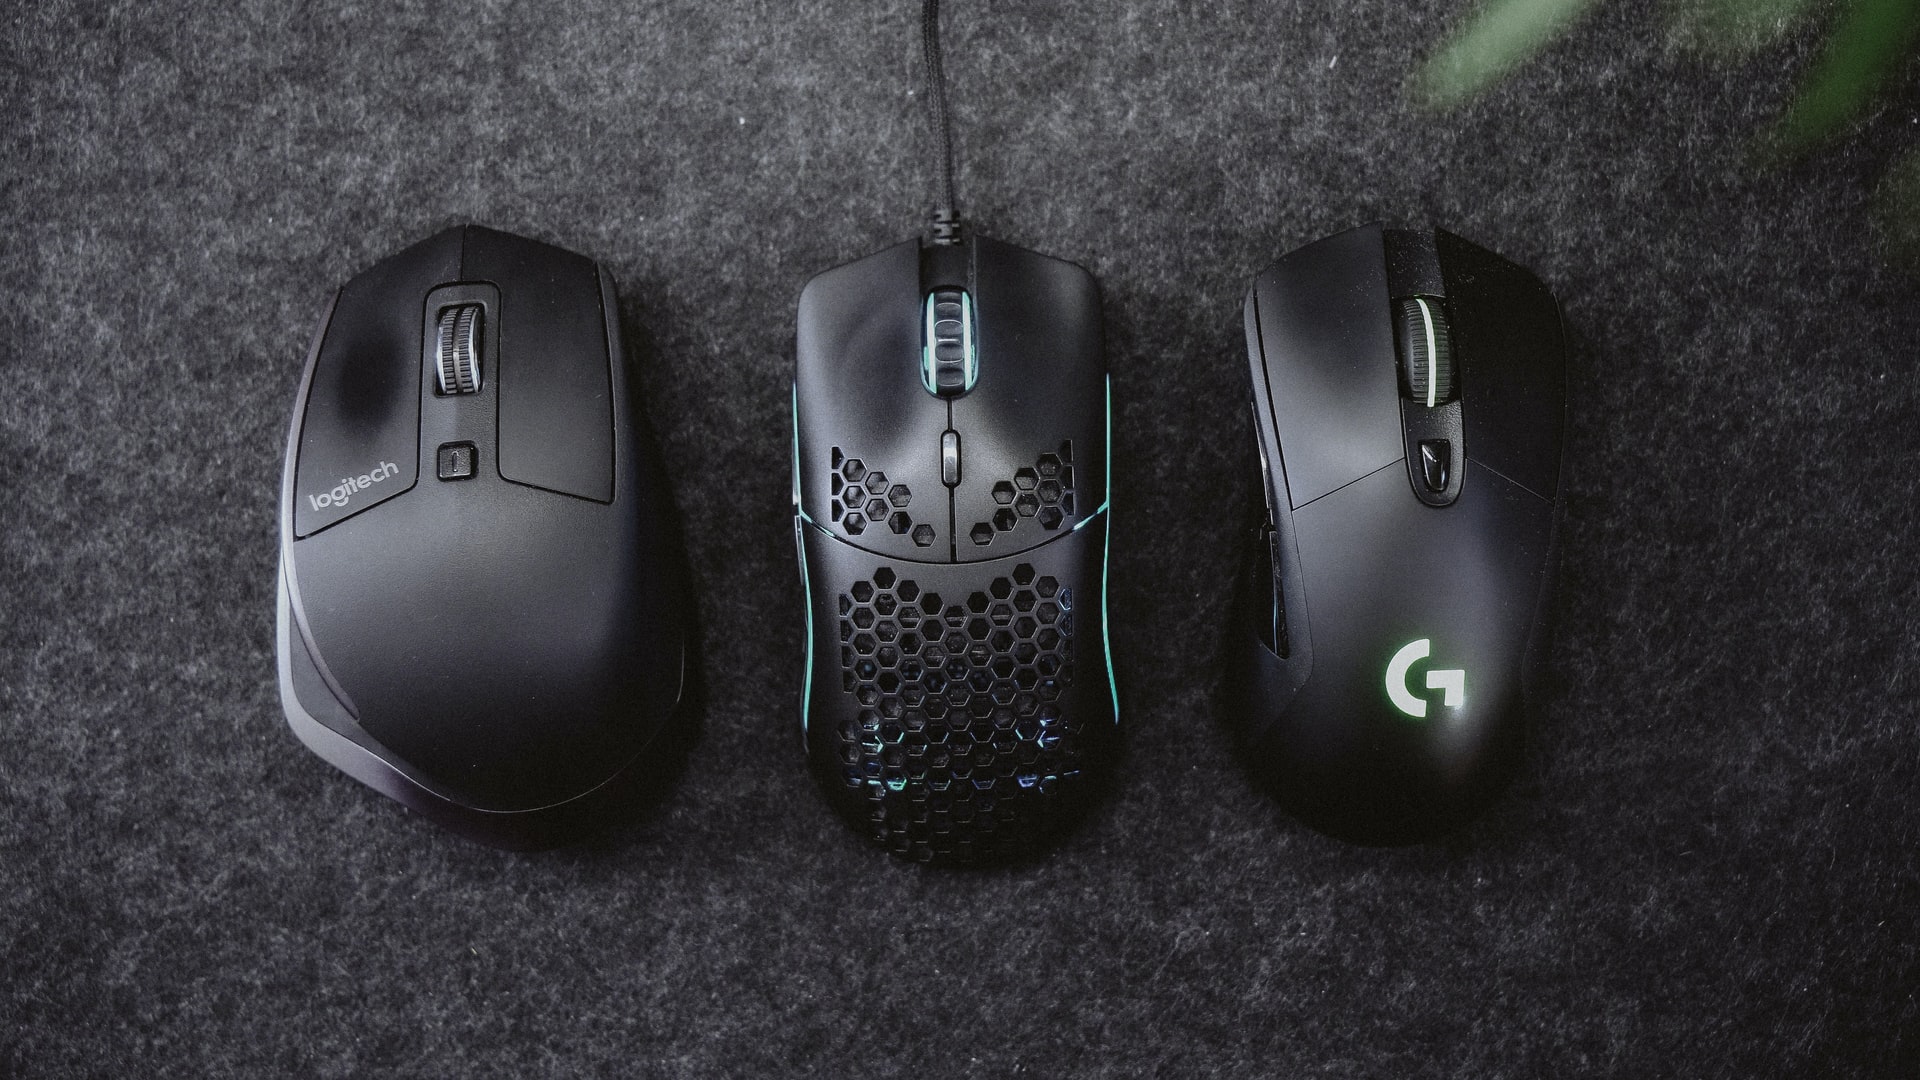 Mouse with weights – is it worth buying?